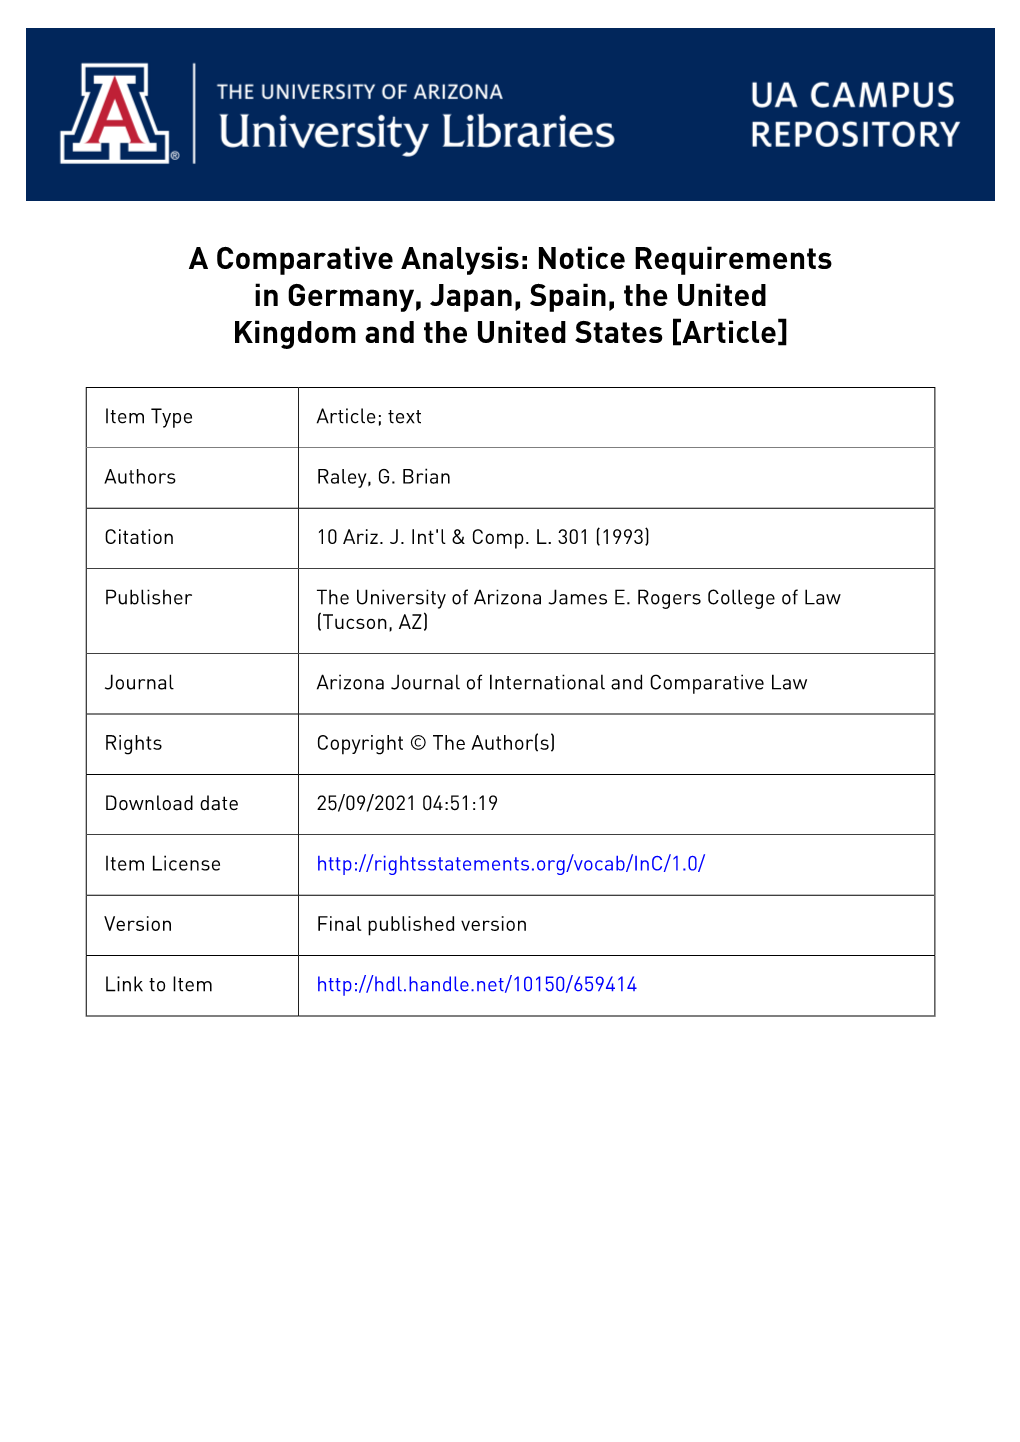 A Comparative Analysis: Notice Requirements in Germany, Japan, Spain, the United Kingdom and the United States [Article]